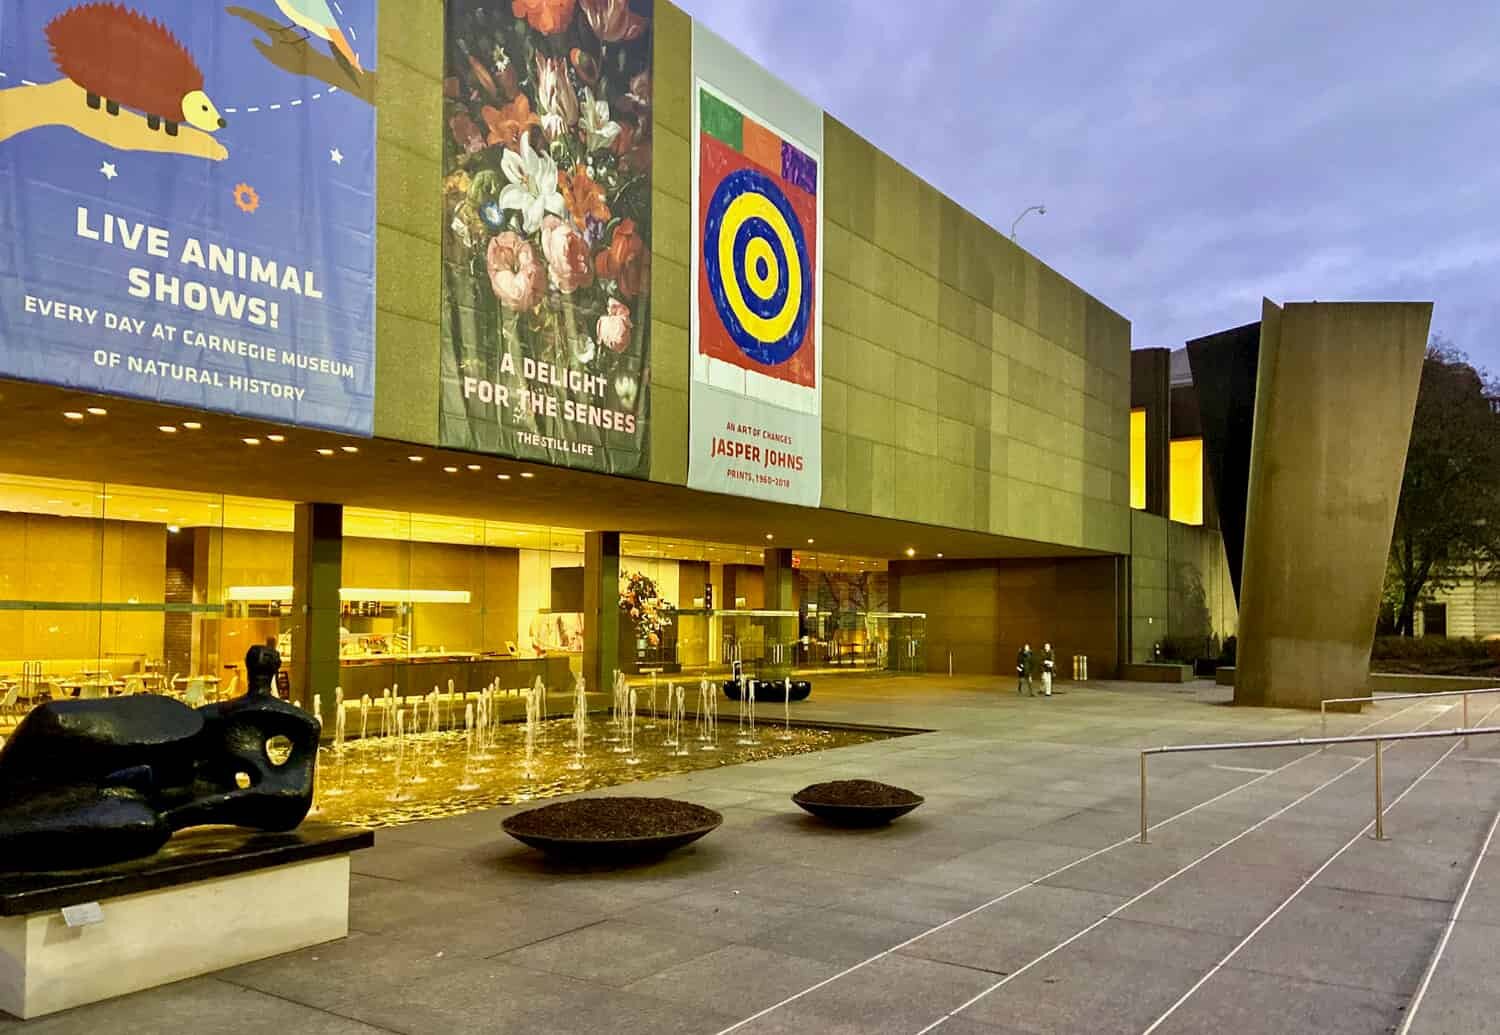  The main entrance to the Carnegie museums of arts and natural history. 